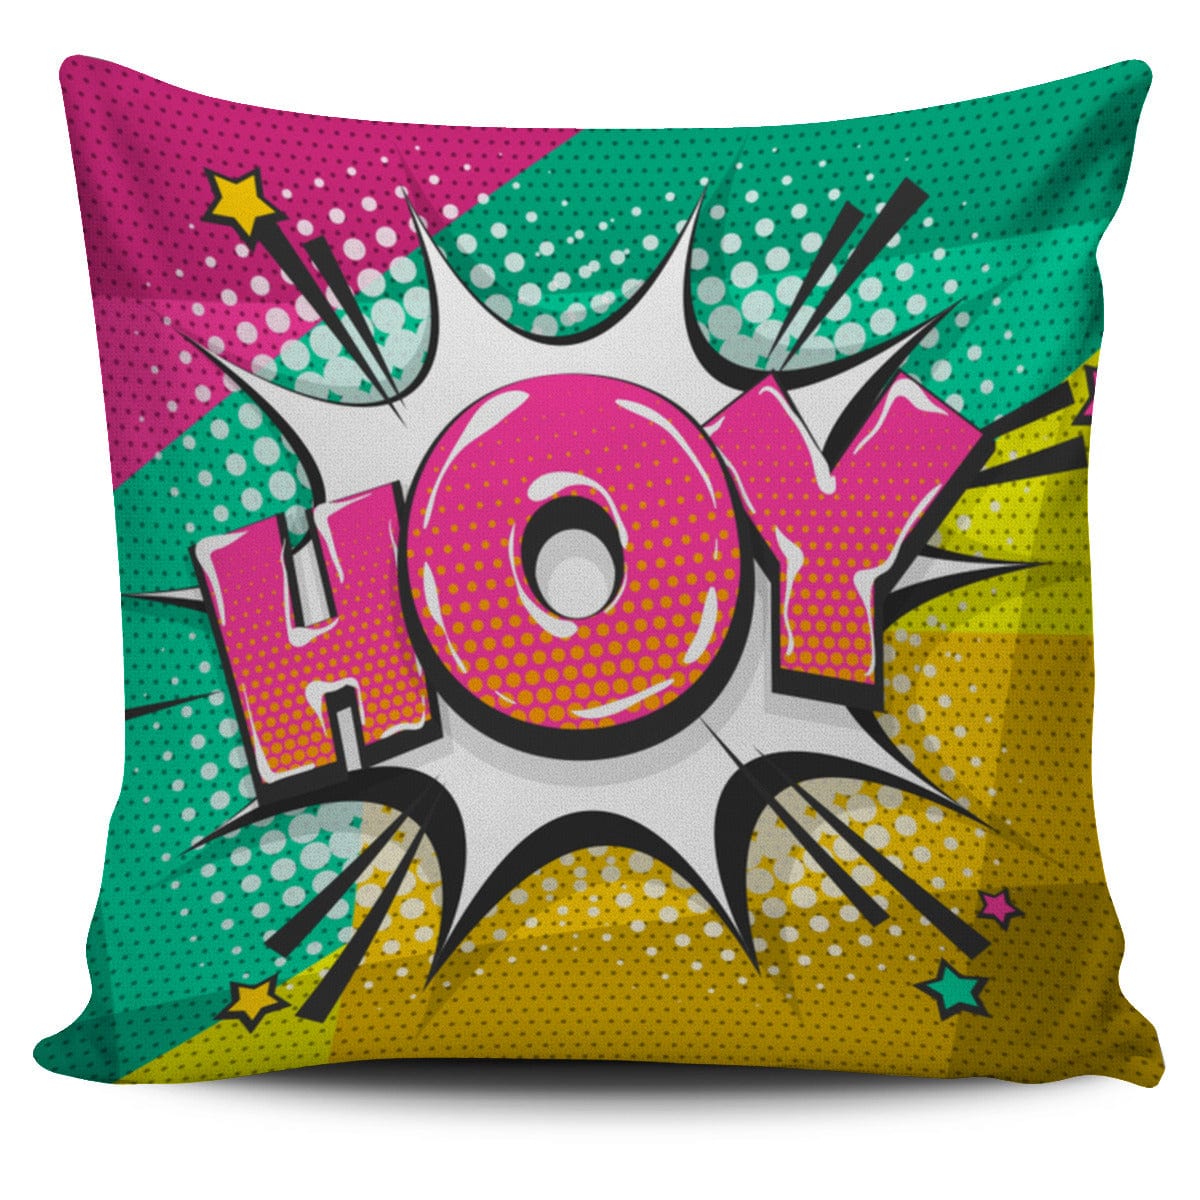 Pillow Cover - Hoy - GiddyGoatStore